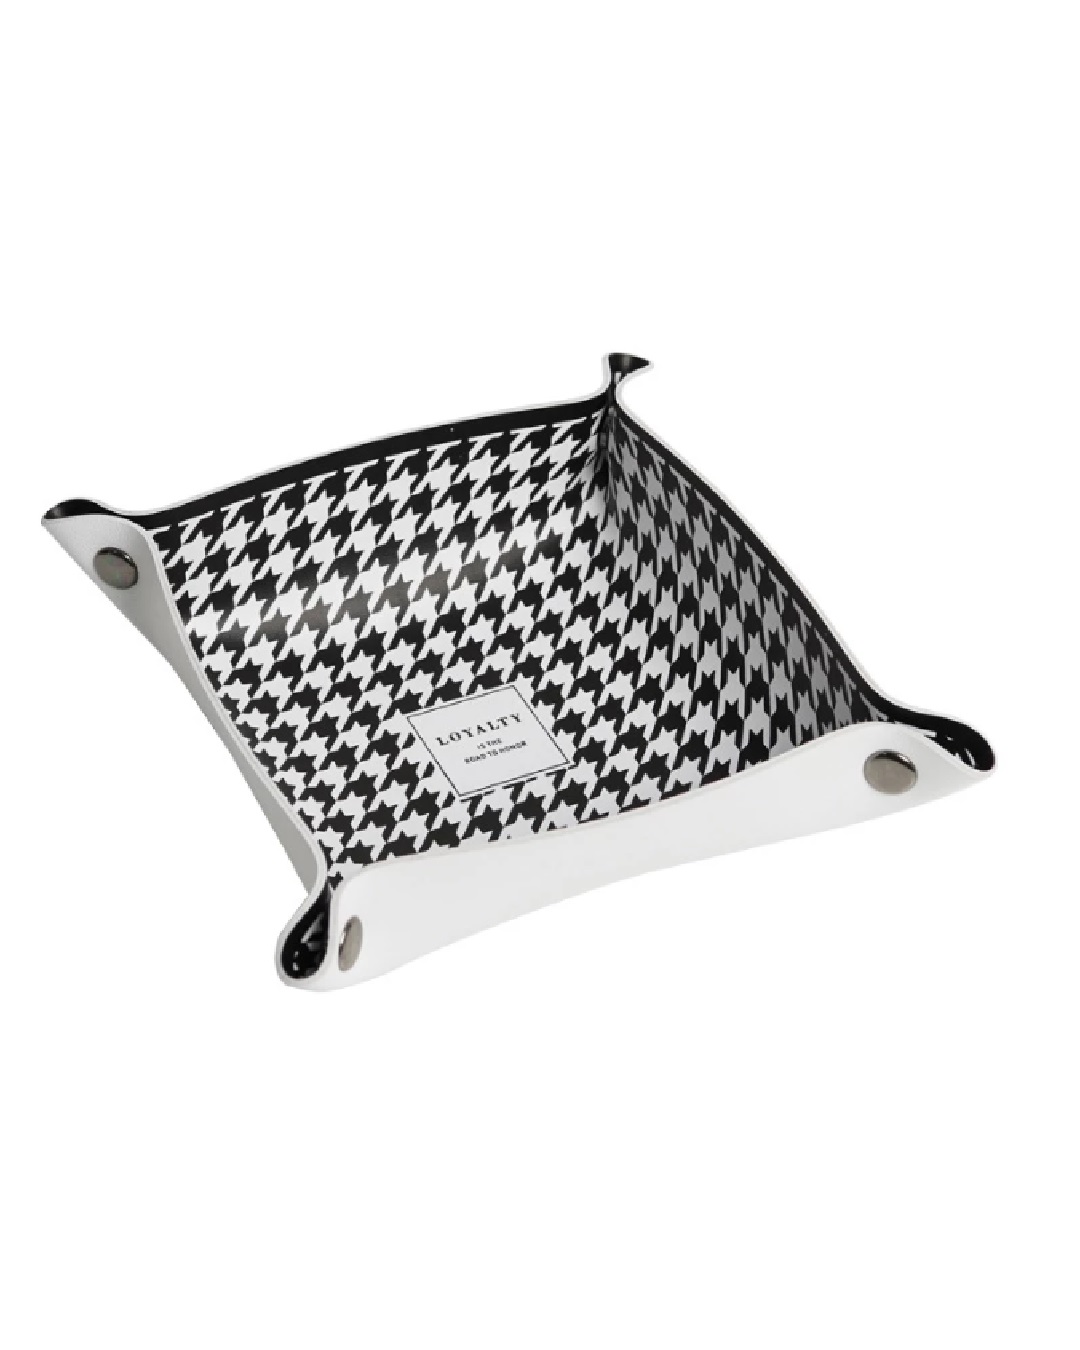 Black and white check tray